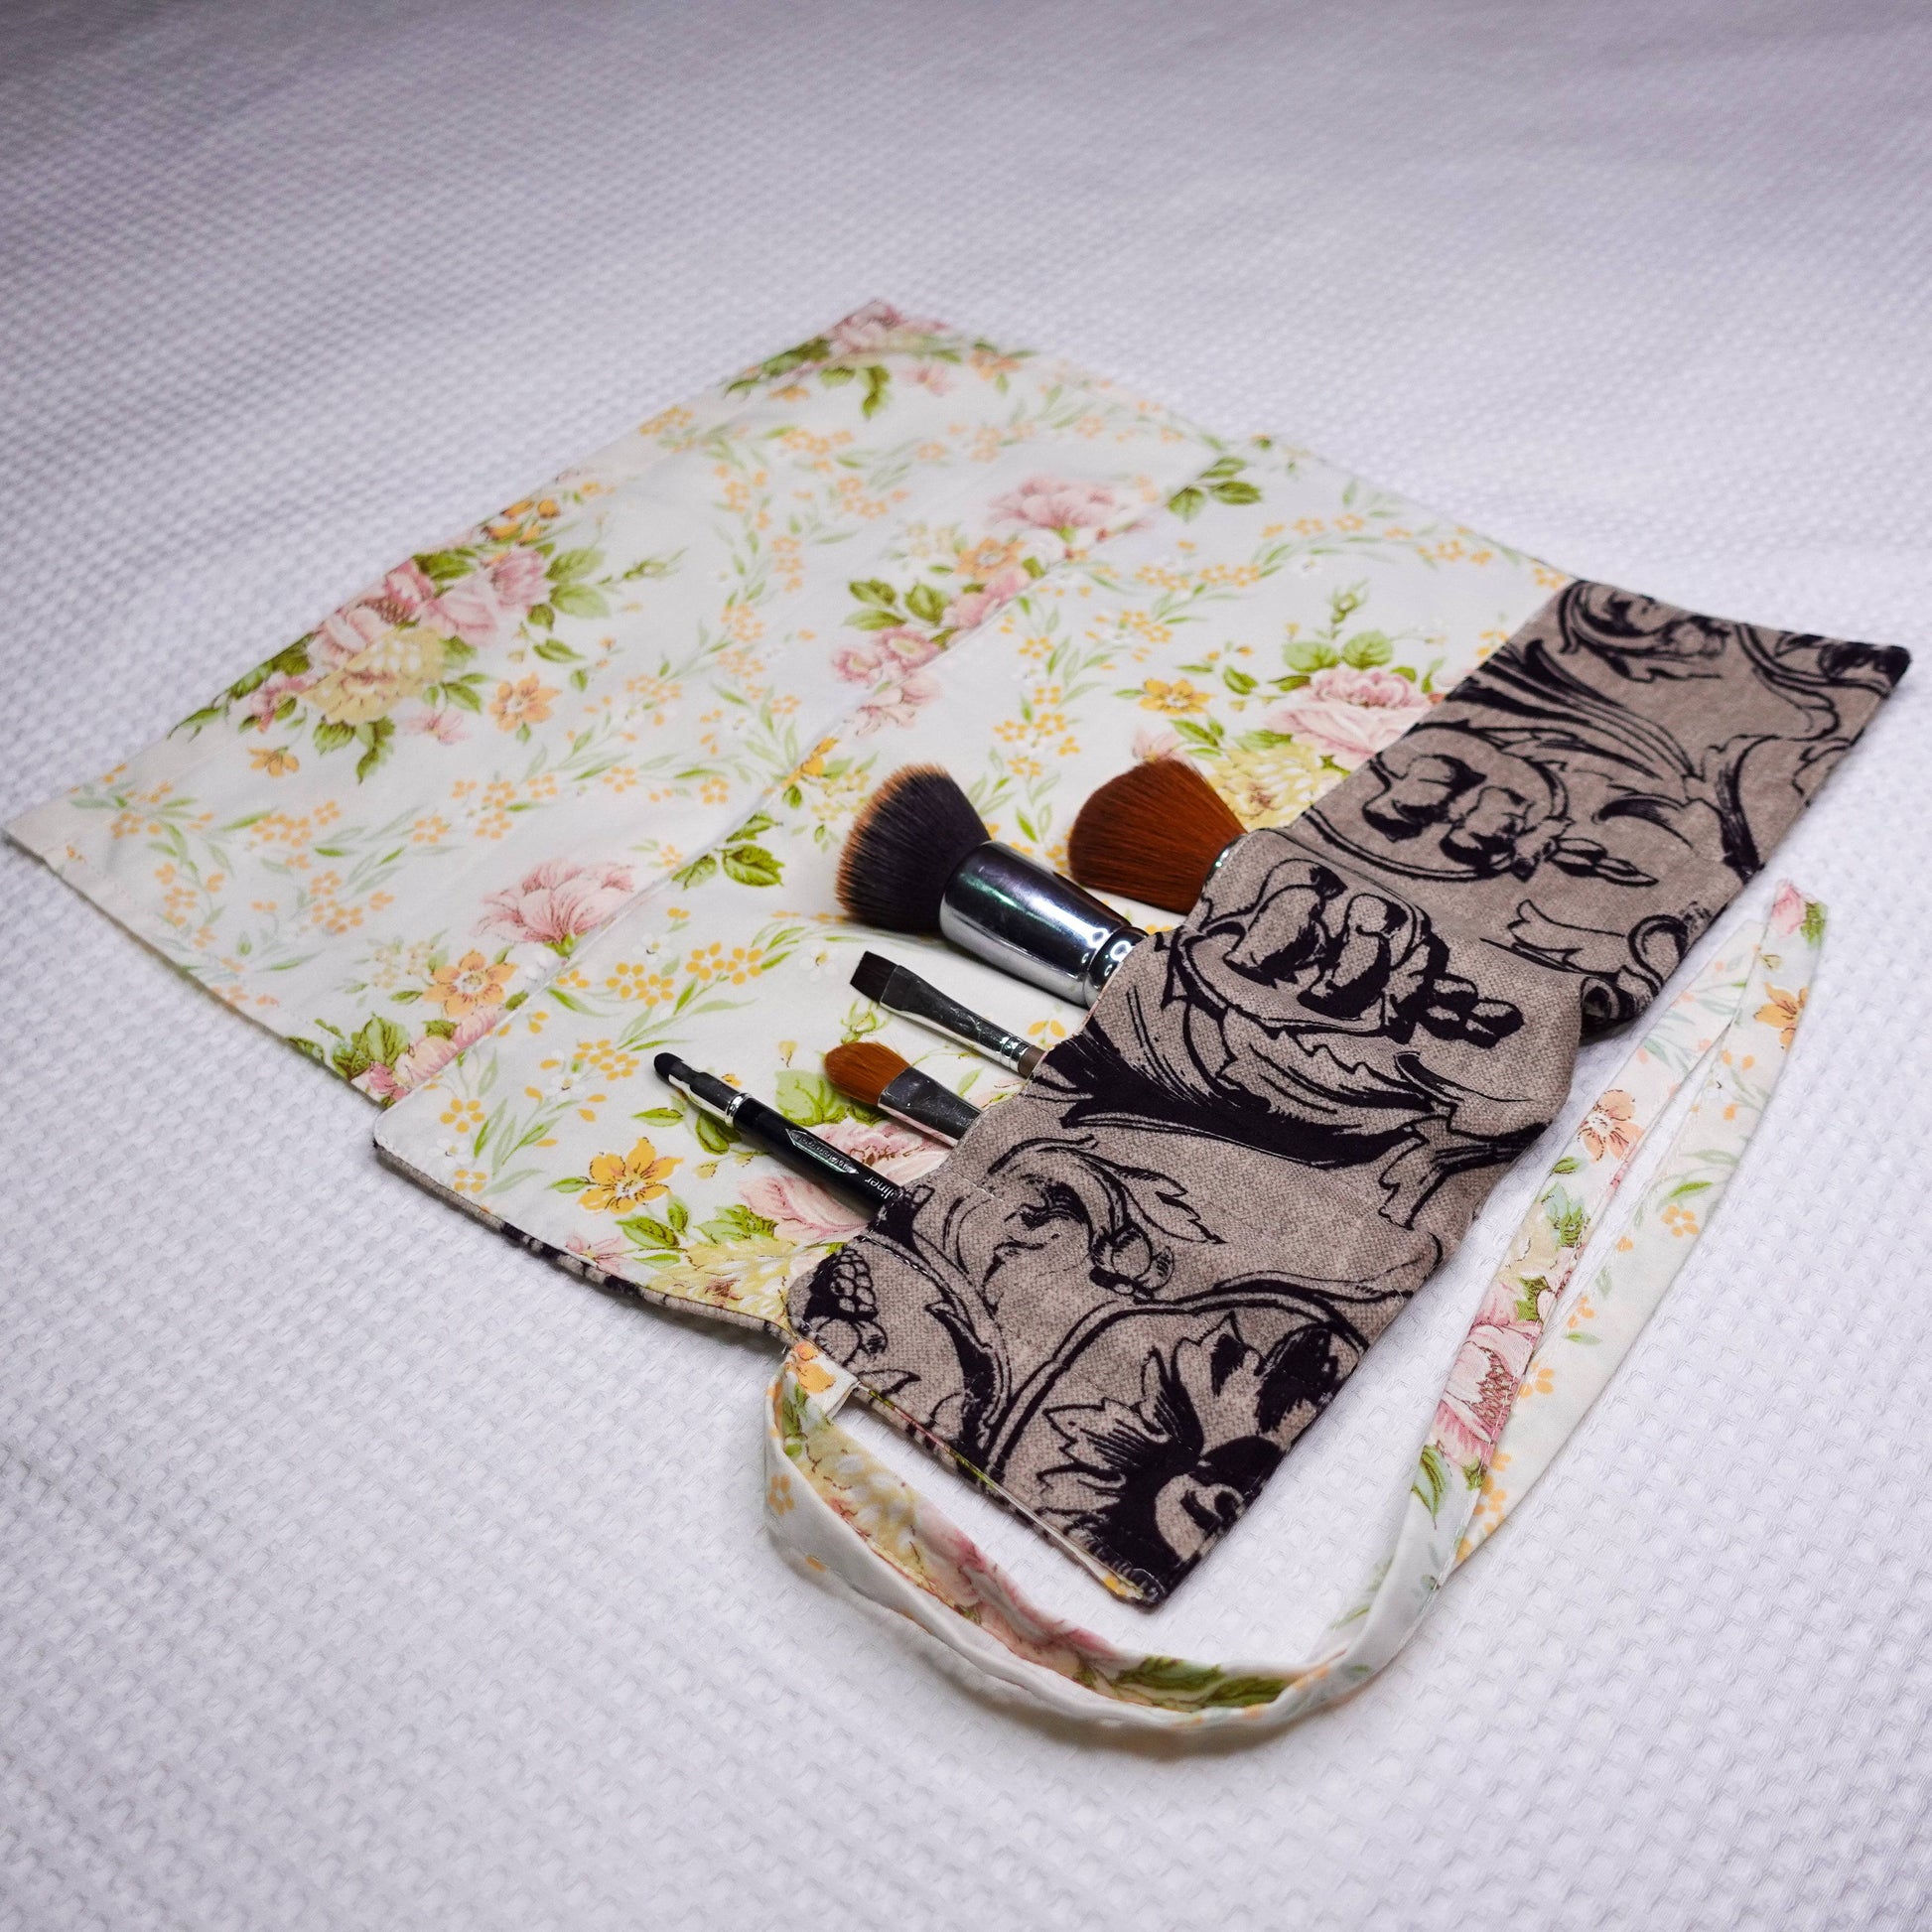 Black Tia Travel Make Up Case - Two toned Abstract